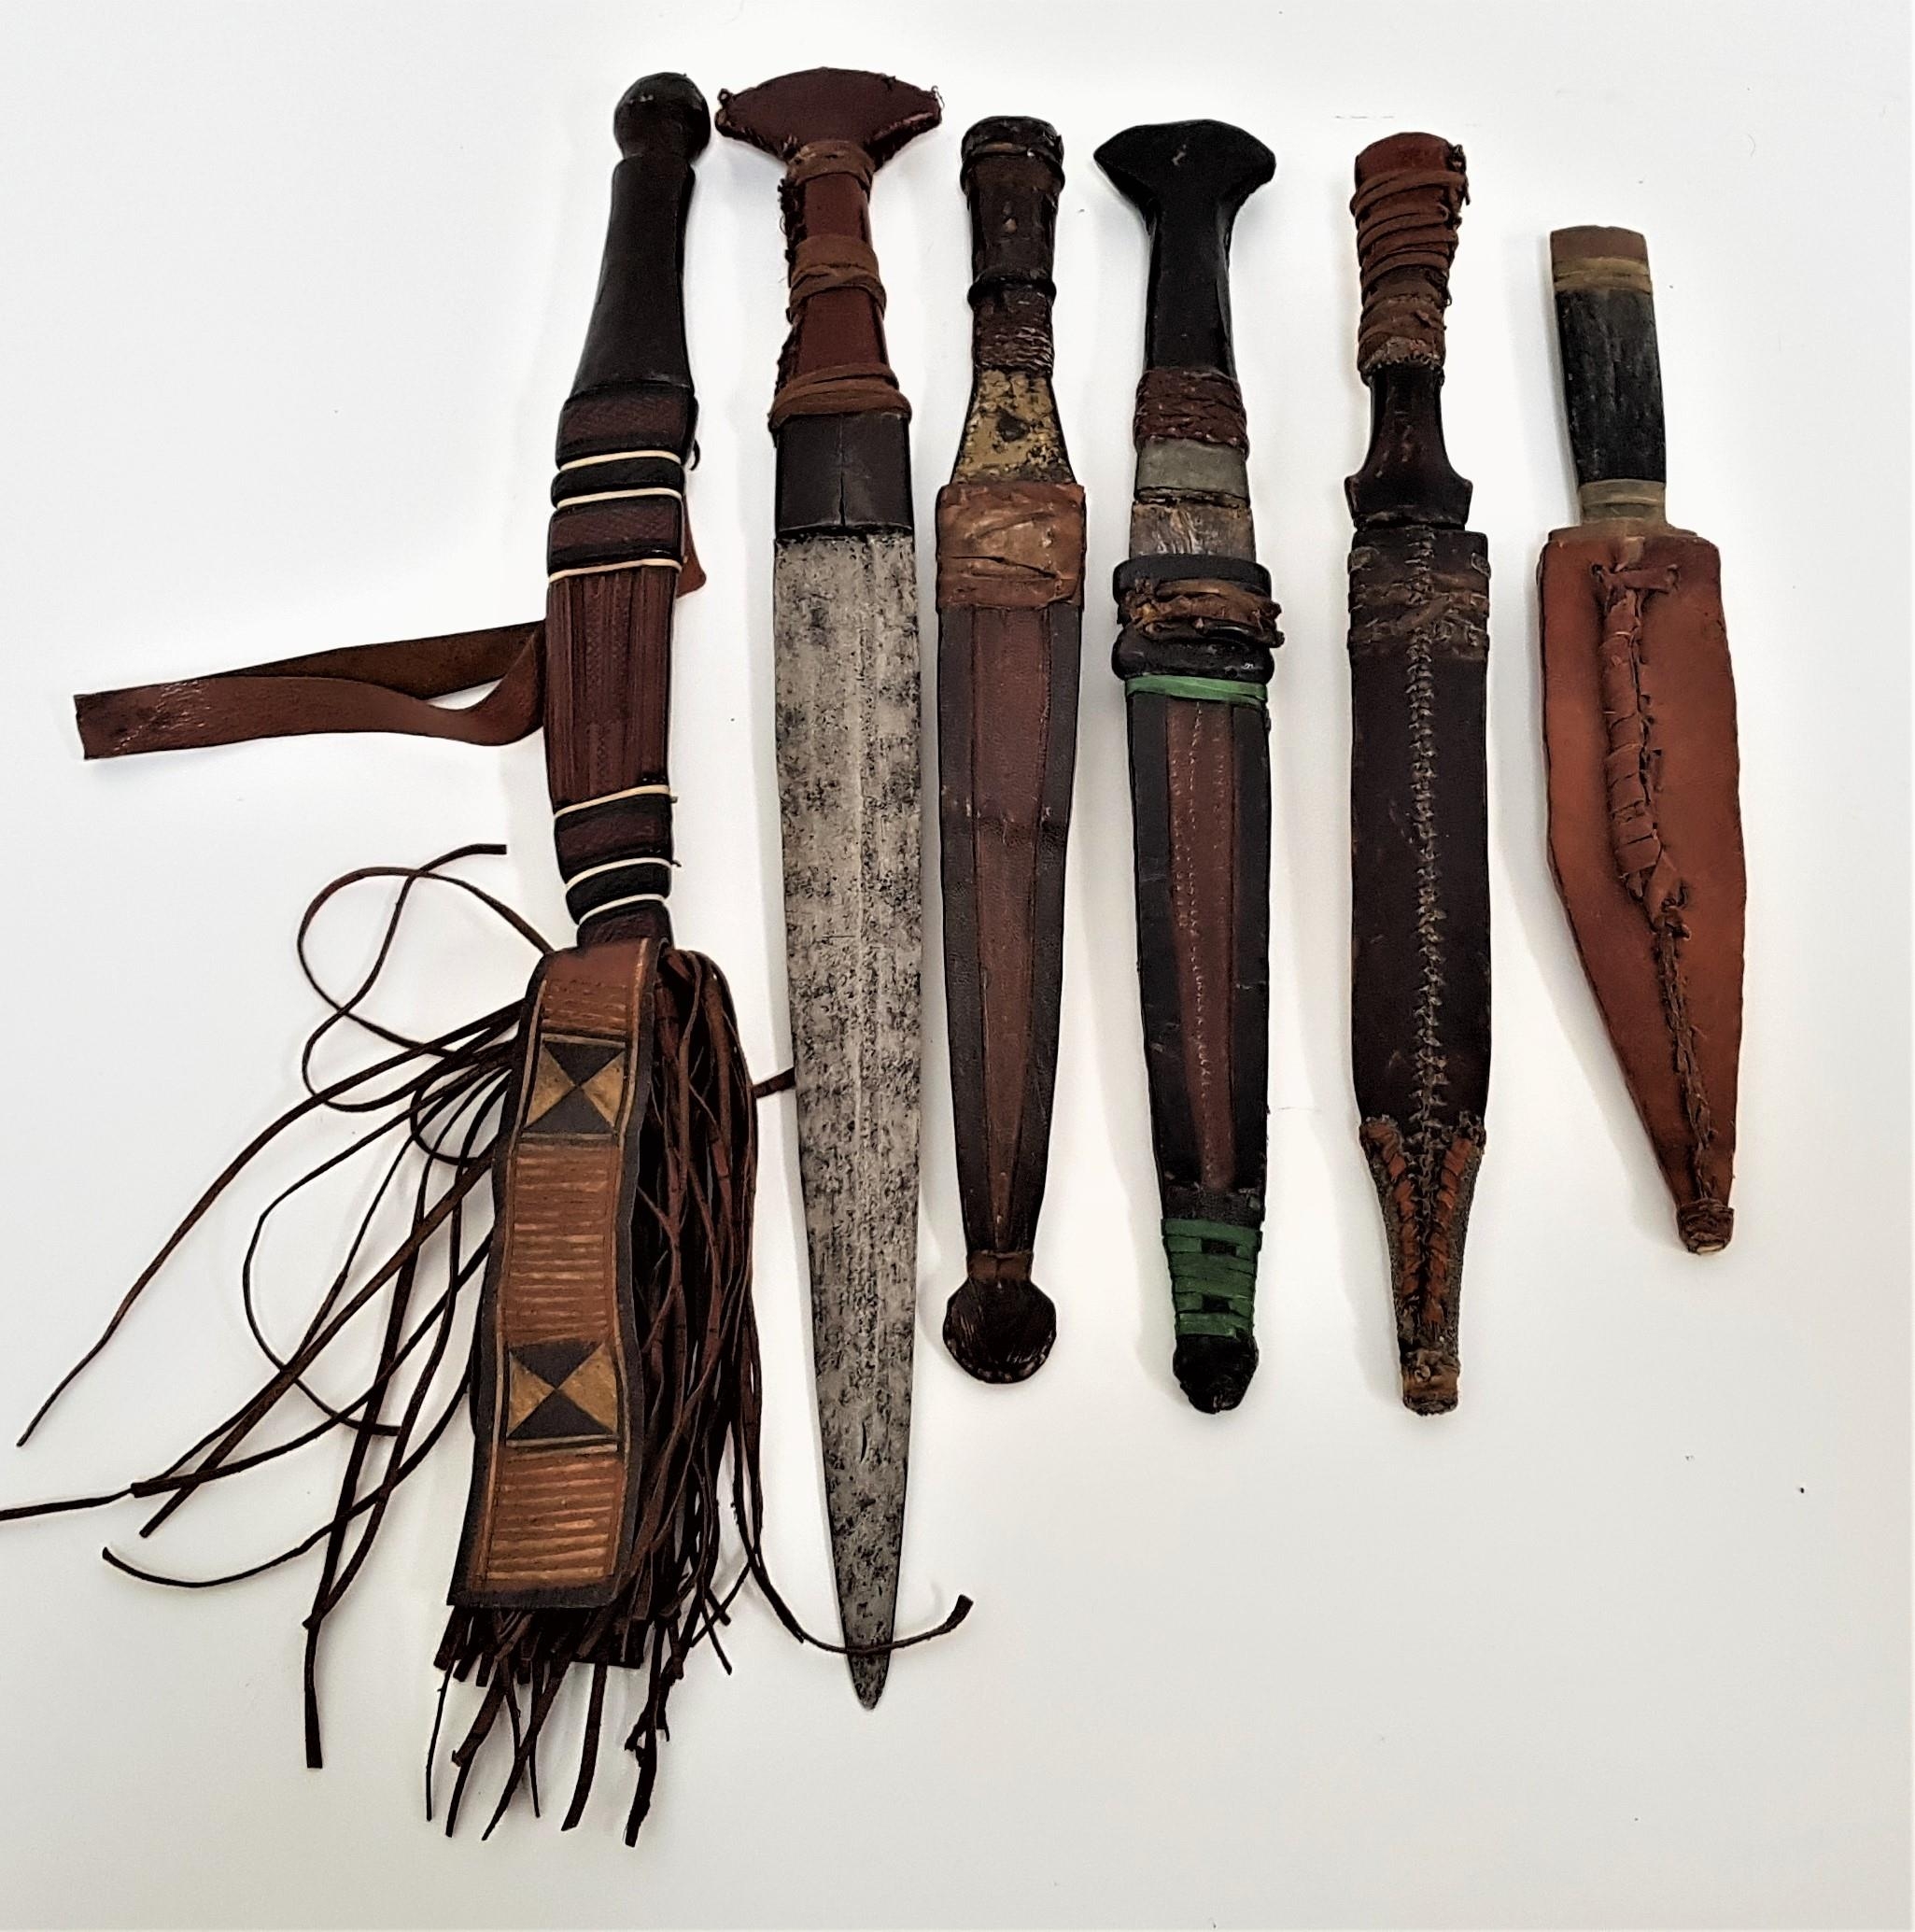 SIX AFRICAN DAGGERS five with double edged blades, all with leather wrapped handles, five with - Image 2 of 2